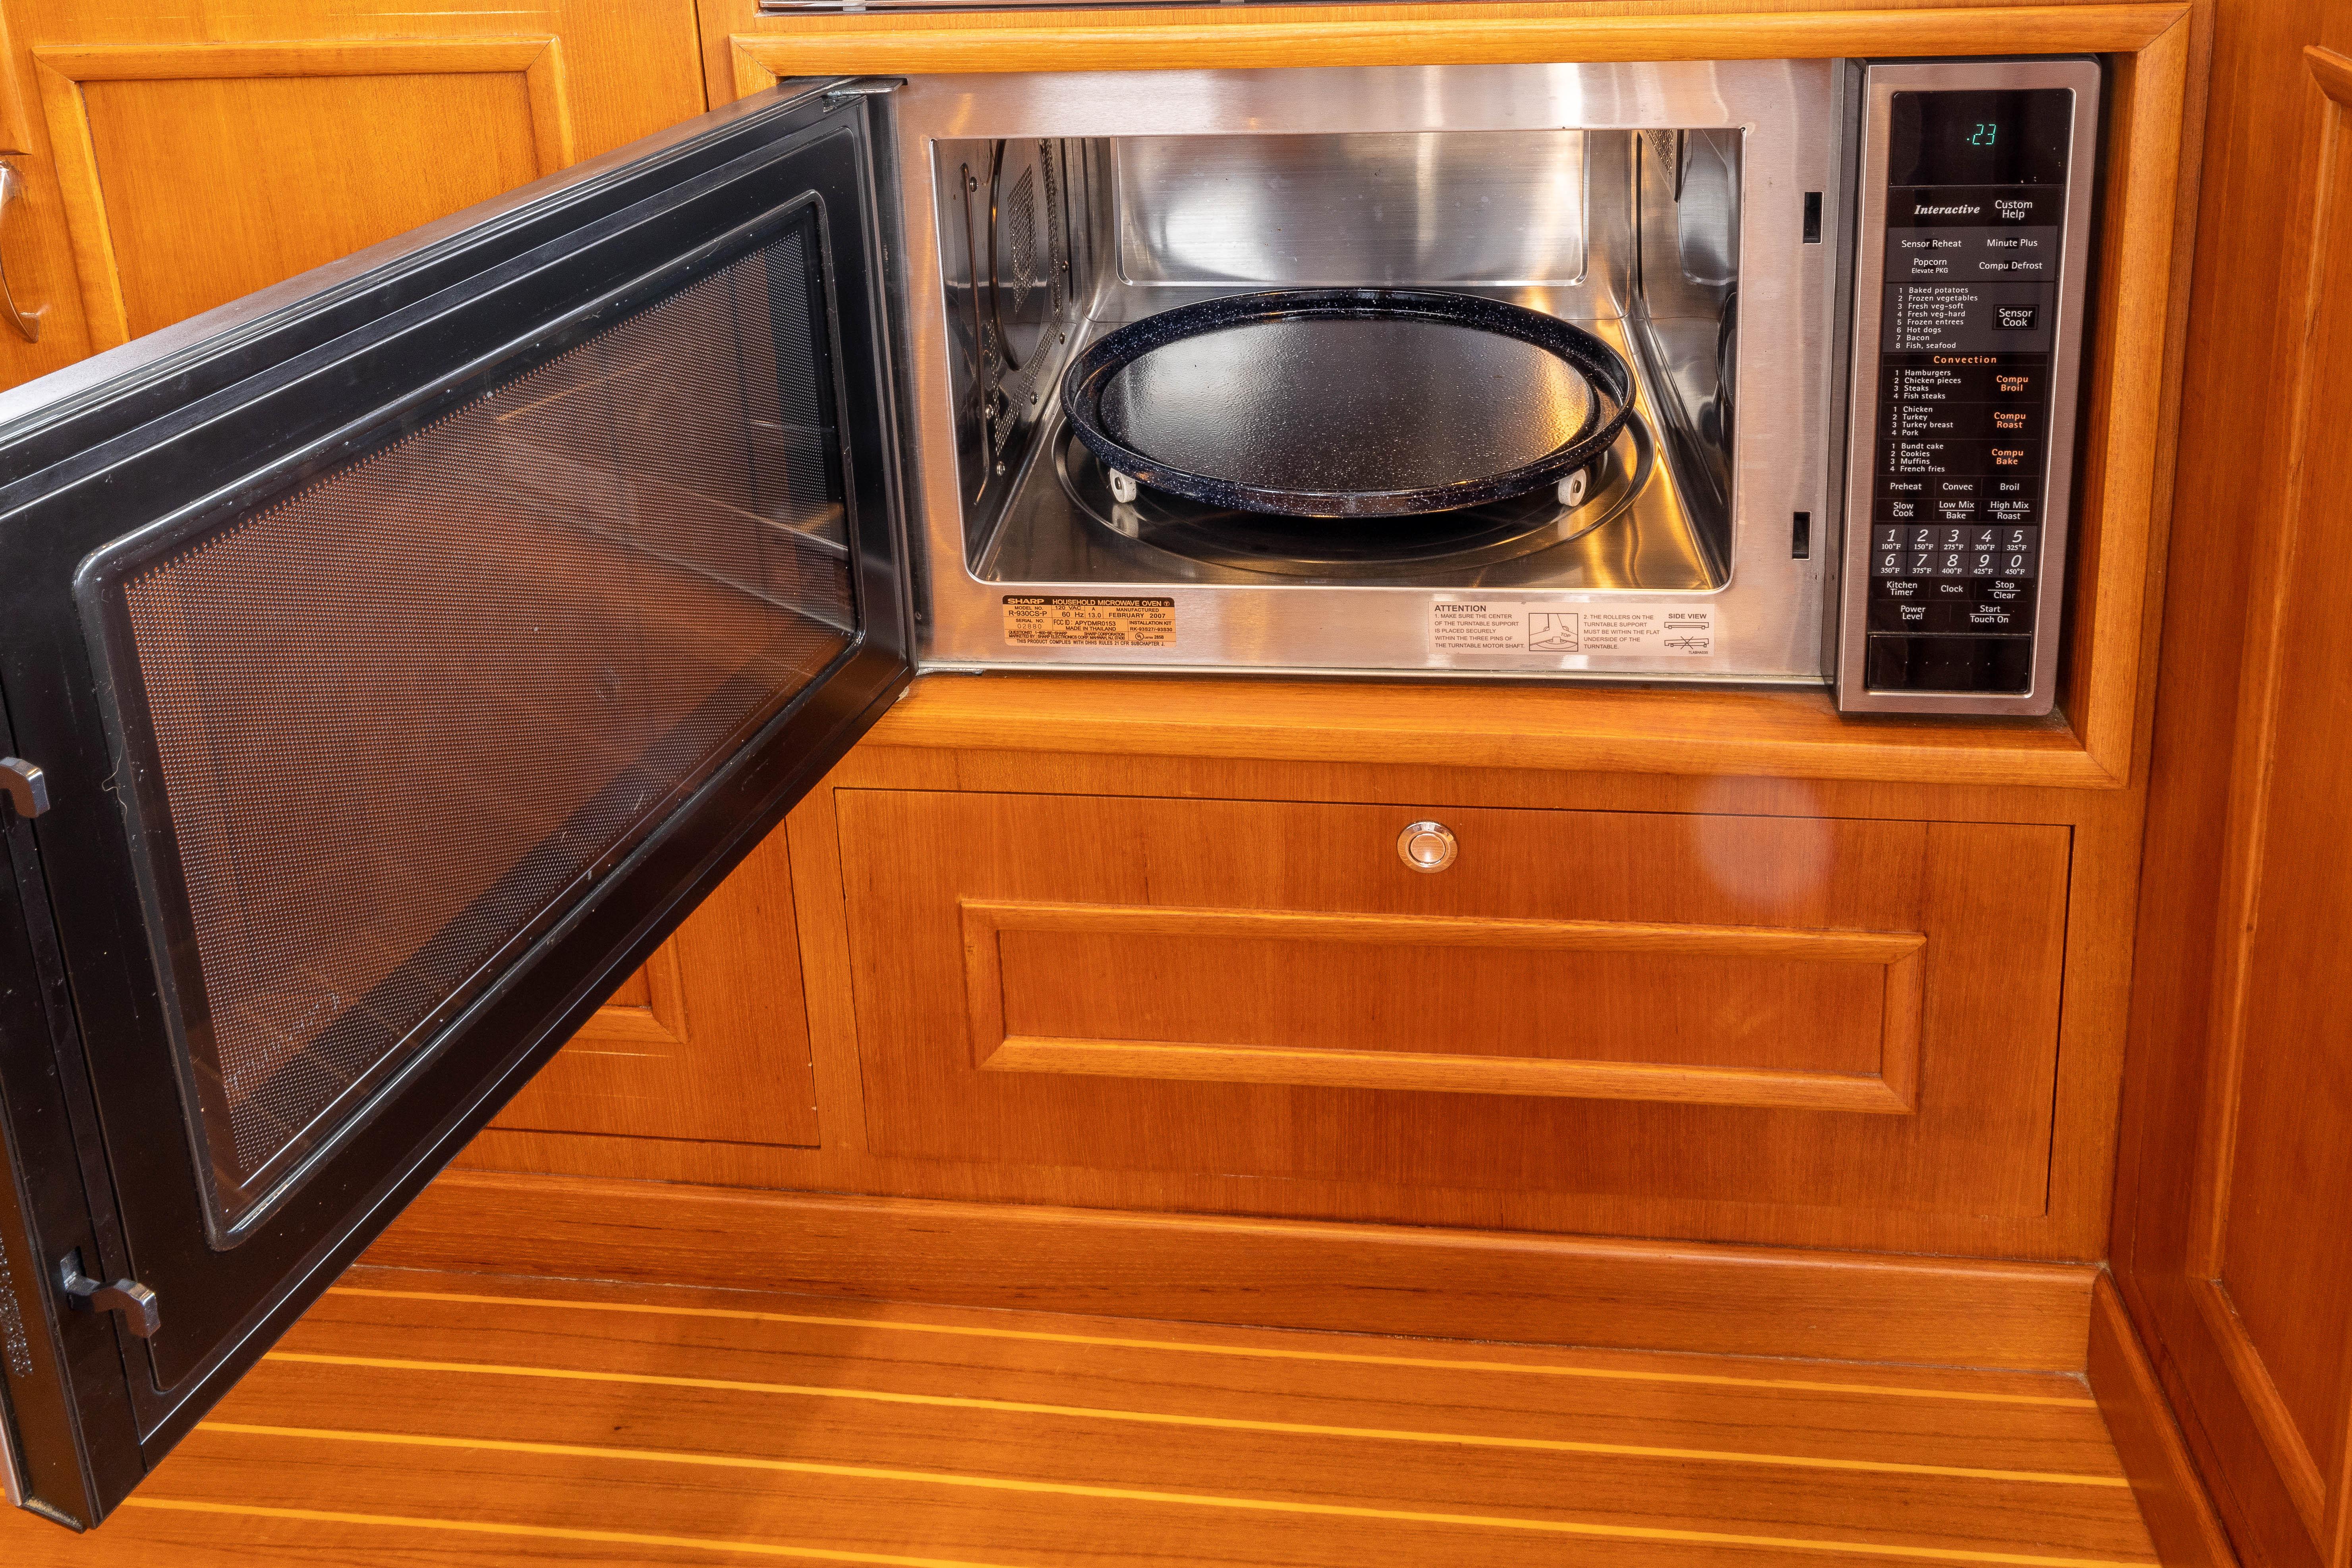 Gleaming Microwave/Convection Oven